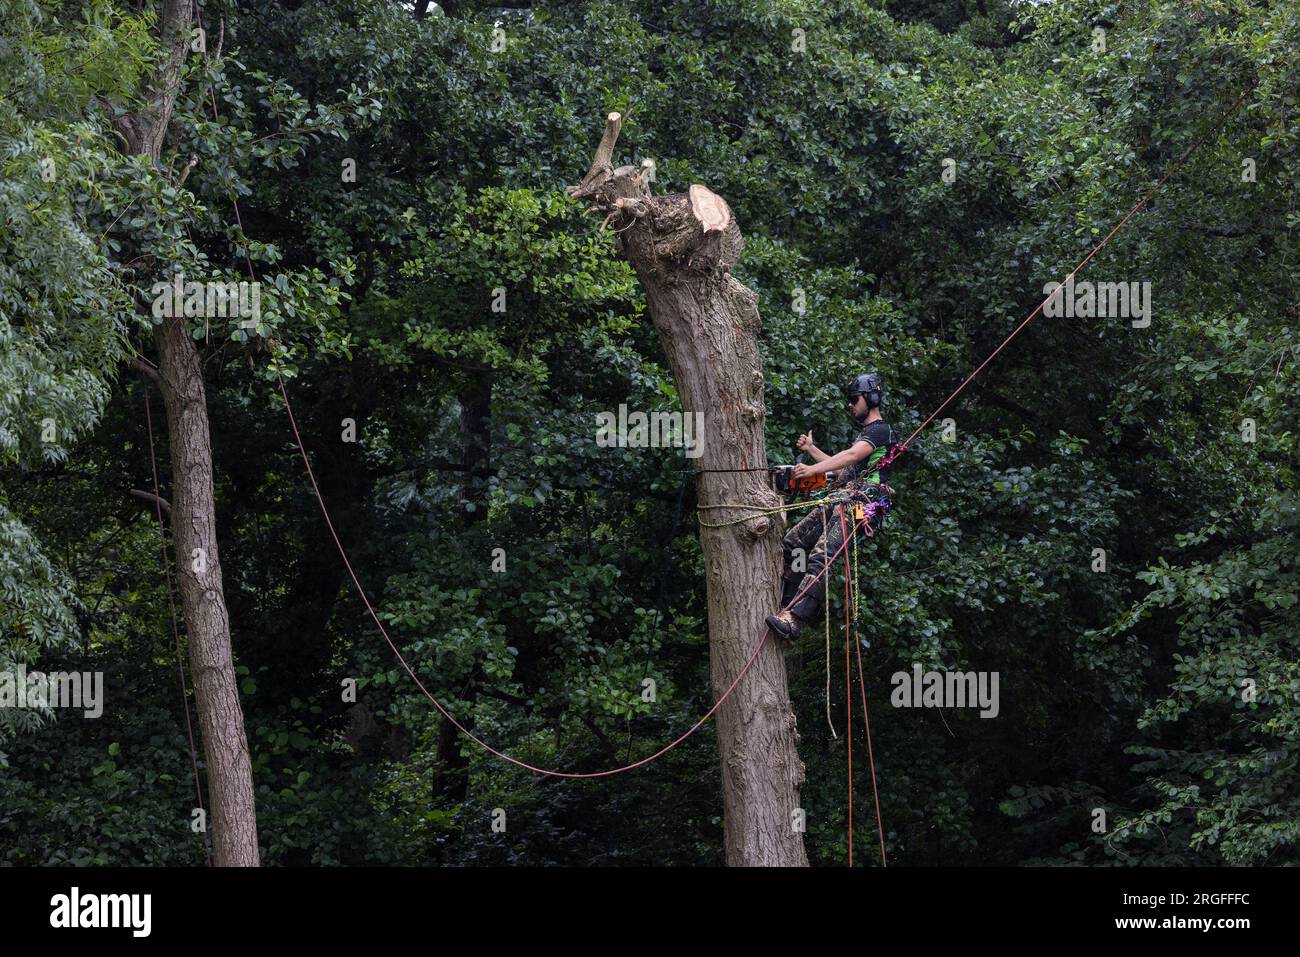 https://c8.alamy.com/comp/2RGFFFC/arborist-tree-surgeon-using-safety-ropes-and-guide-lines-felling-tree-in-uk-2RGFFFC.jpg